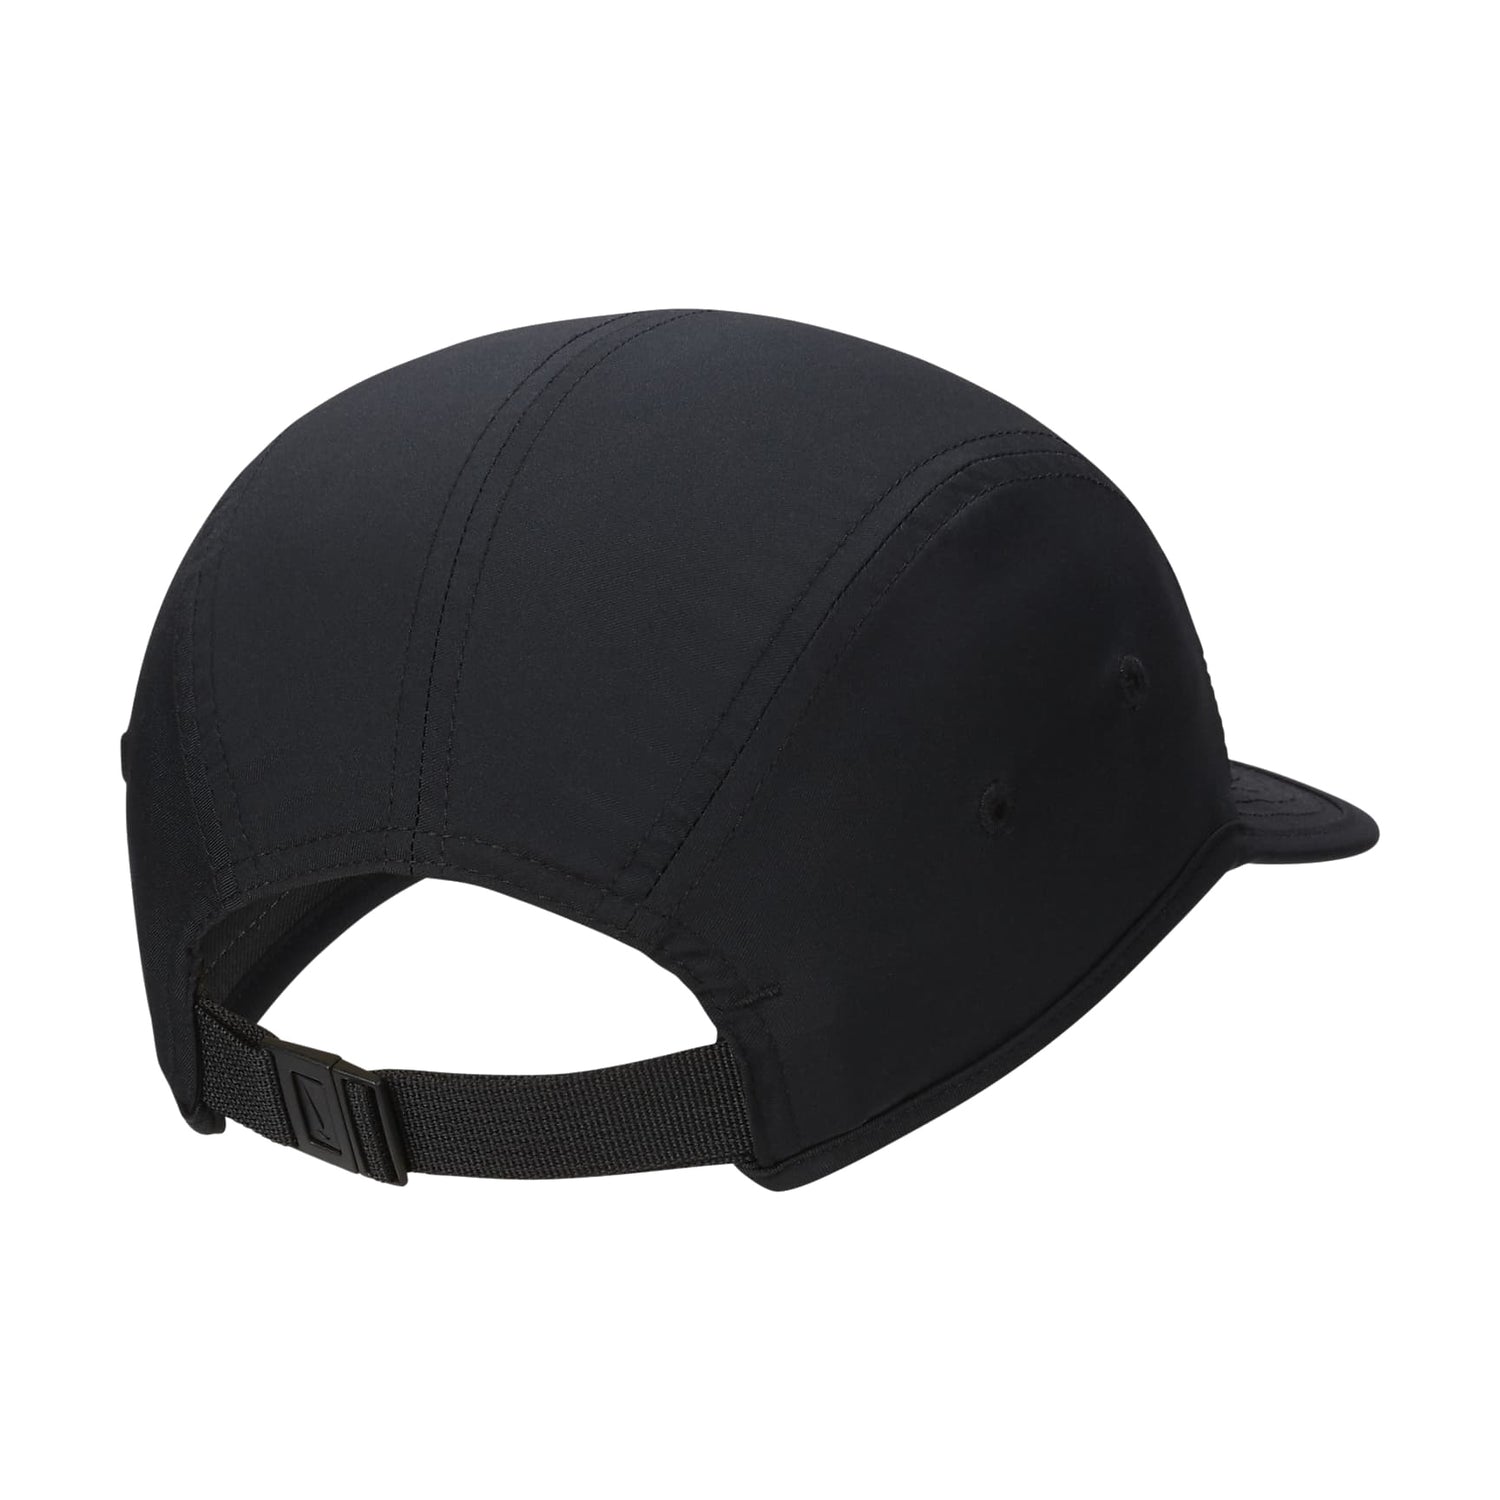 NIKE DRI-FIT FLY HAT BLACK / ANTHRACITE / WHITE